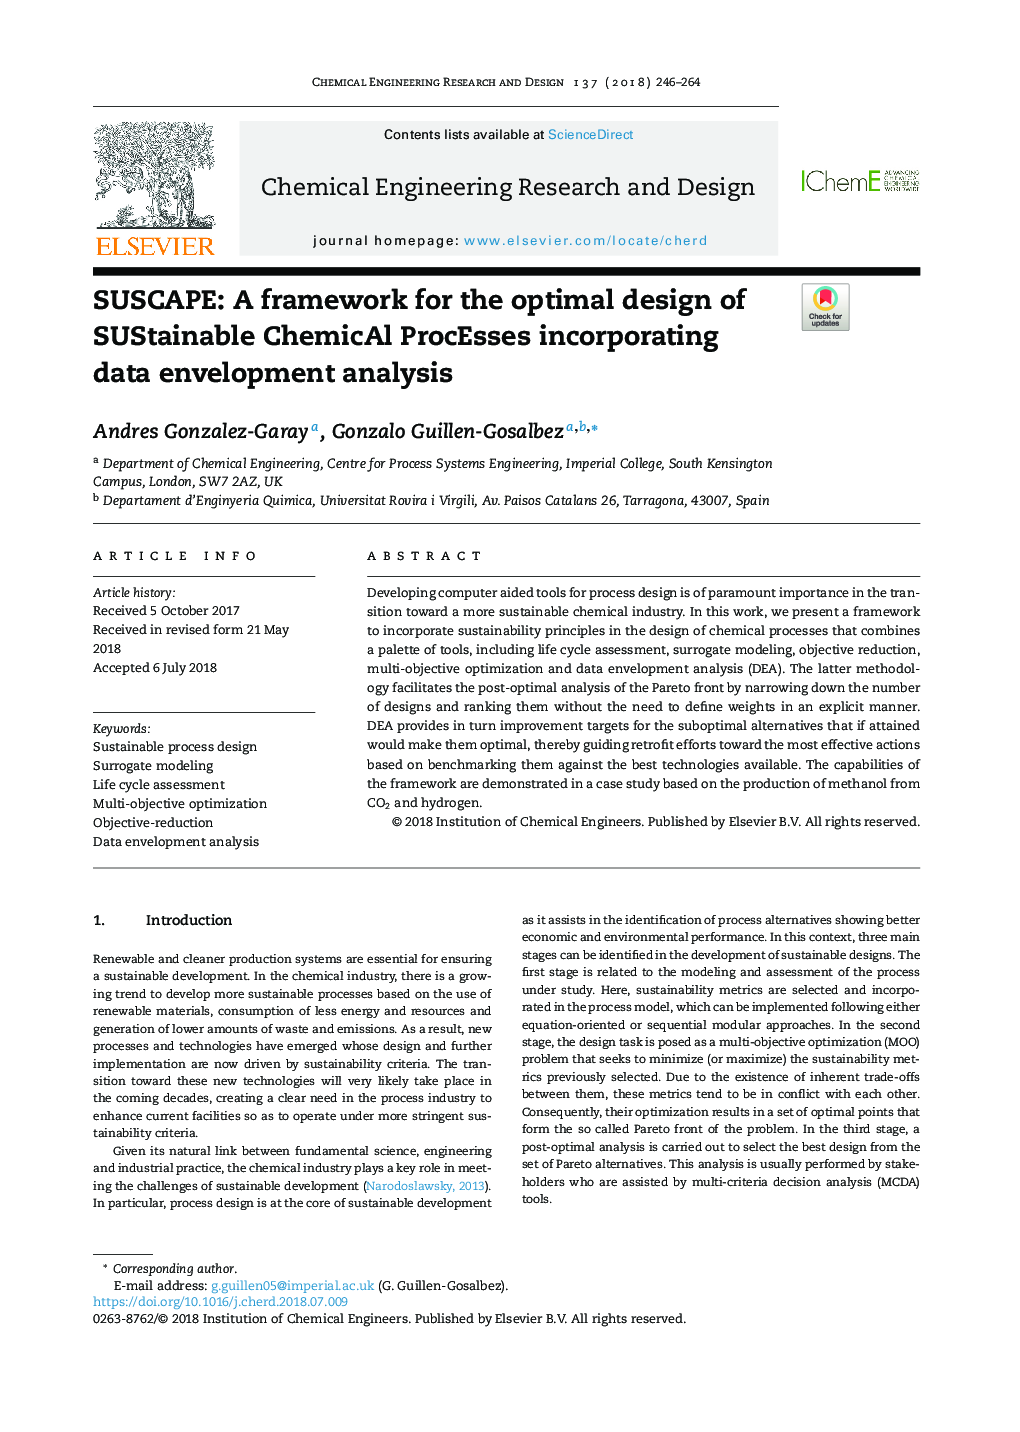 SUSCAPE: A framework for the optimal design of SUStainable ChemicAl ProcEsses incorporating data envelopment analysis